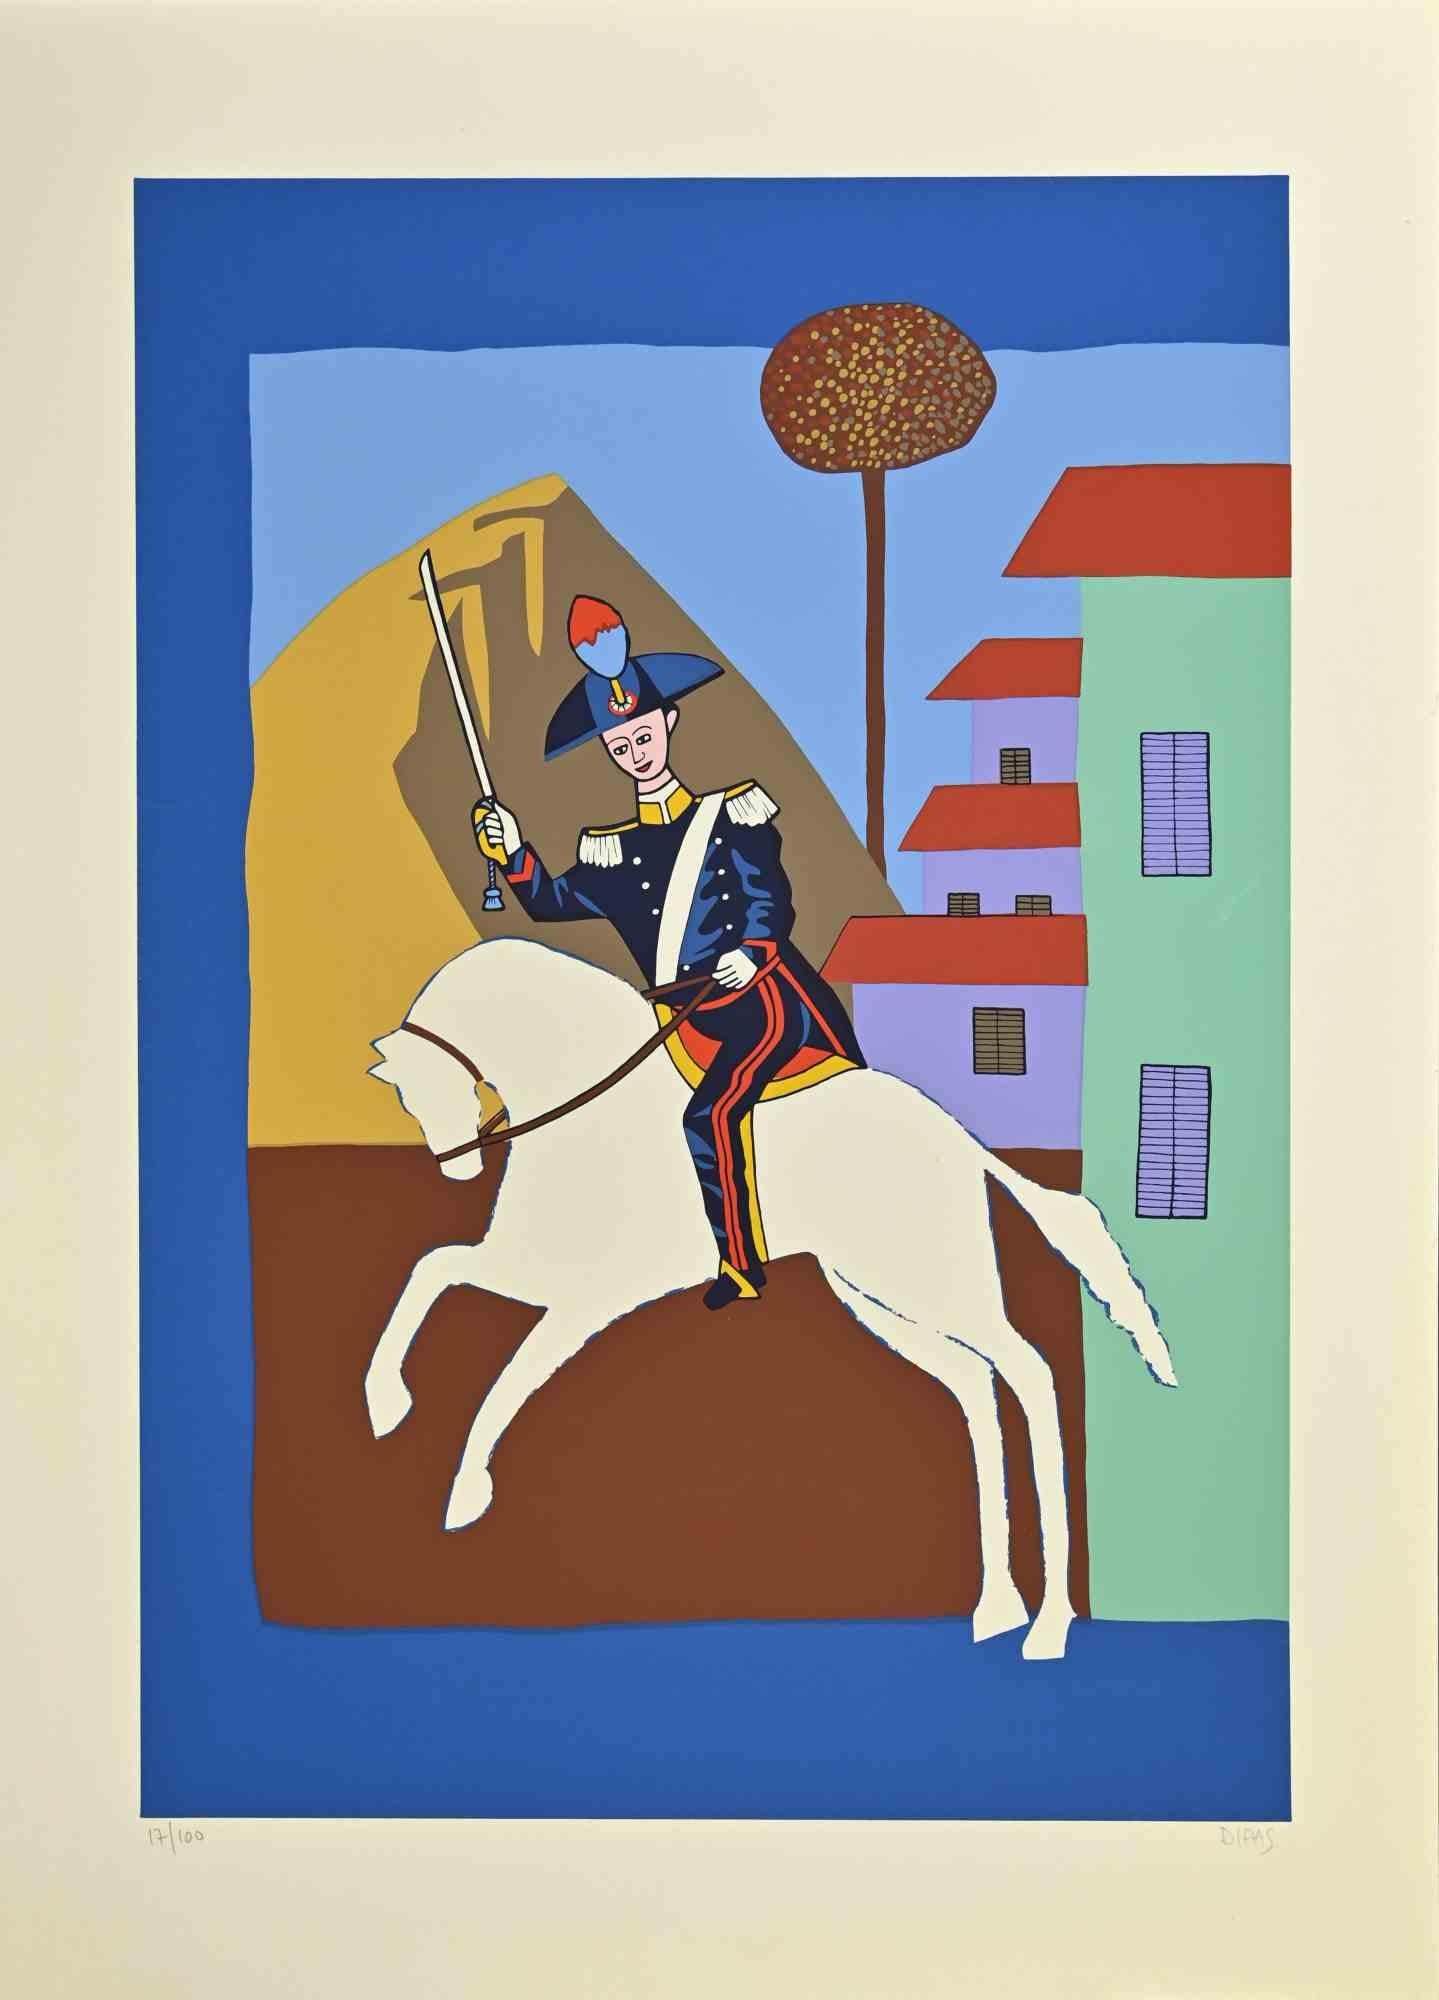 The greeting is a contemporary artwork realized by the artist Dipas in the 1970s.

Mixed colored screen print.

Hand signed on the lower right margin.

Numbered on the lower left margin.

Edition of 17/100.